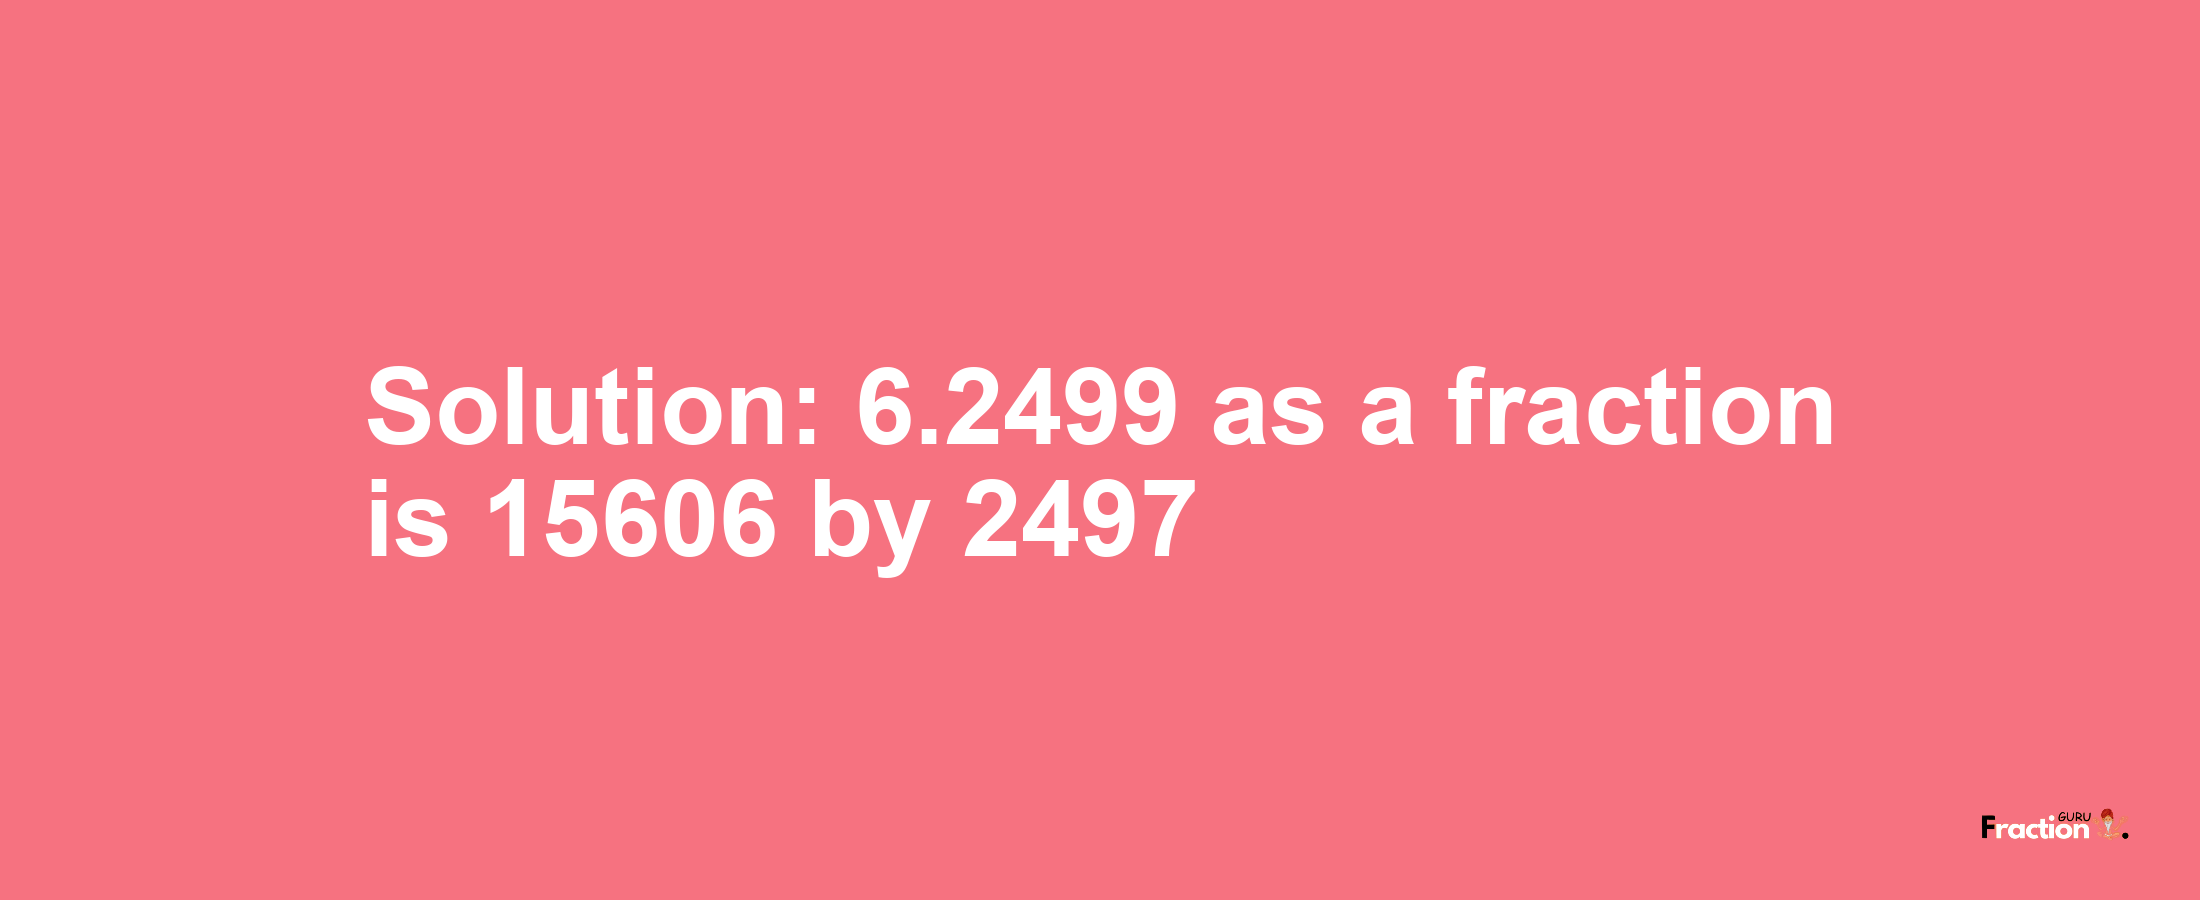 Solution:6.2499 as a fraction is 15606/2497